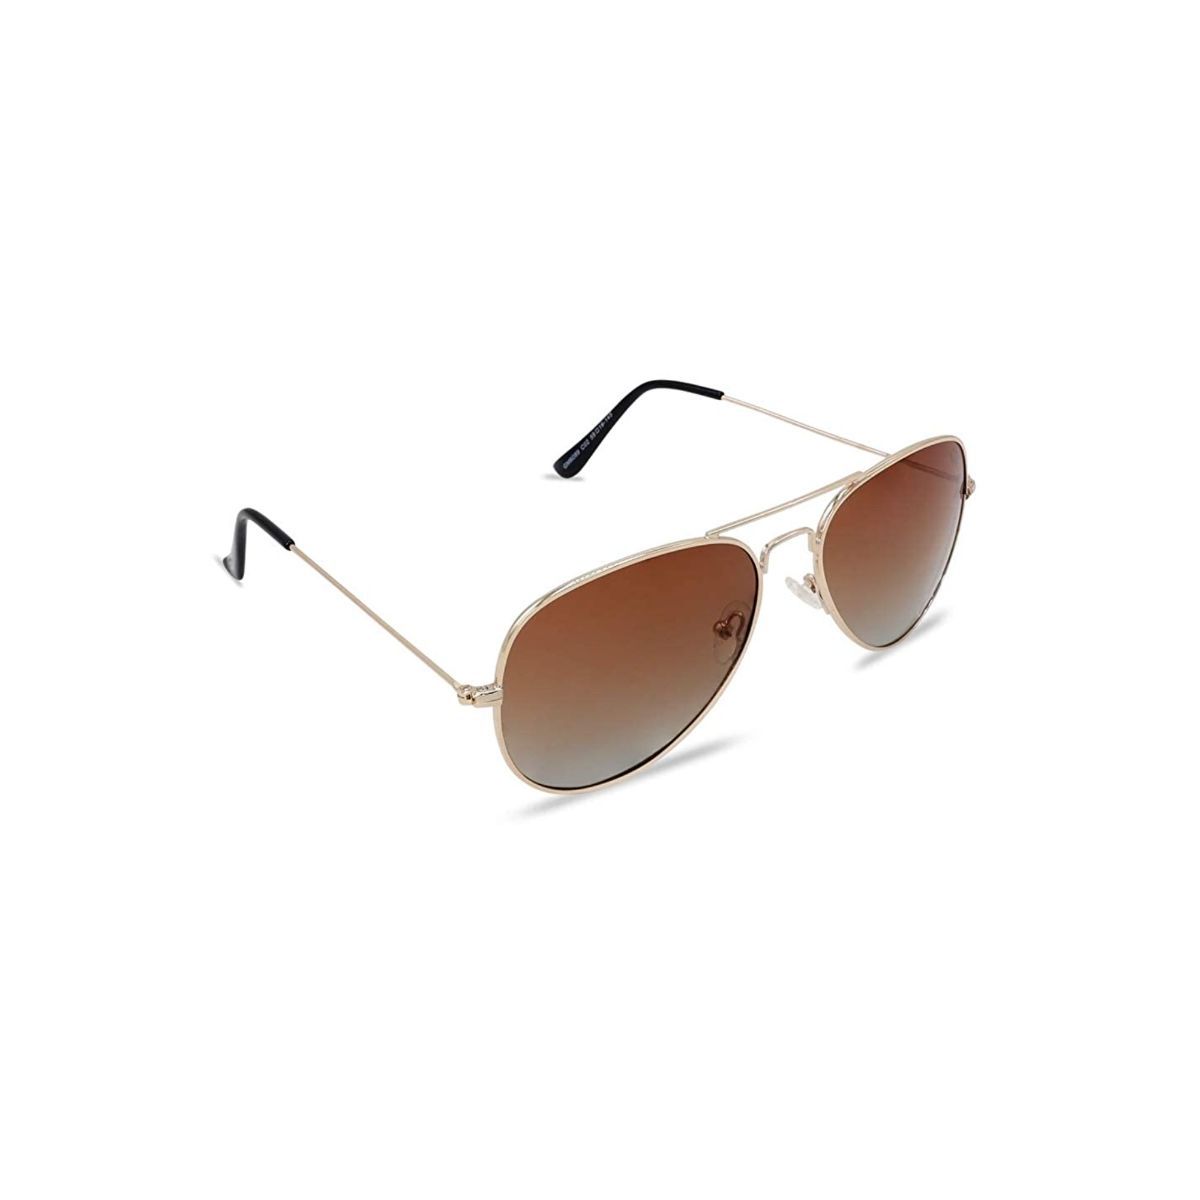 Buy Gio Collection 100% UV Protected Square Unisex Sunglasses (56 | Brown  Lens) at Amazon.in